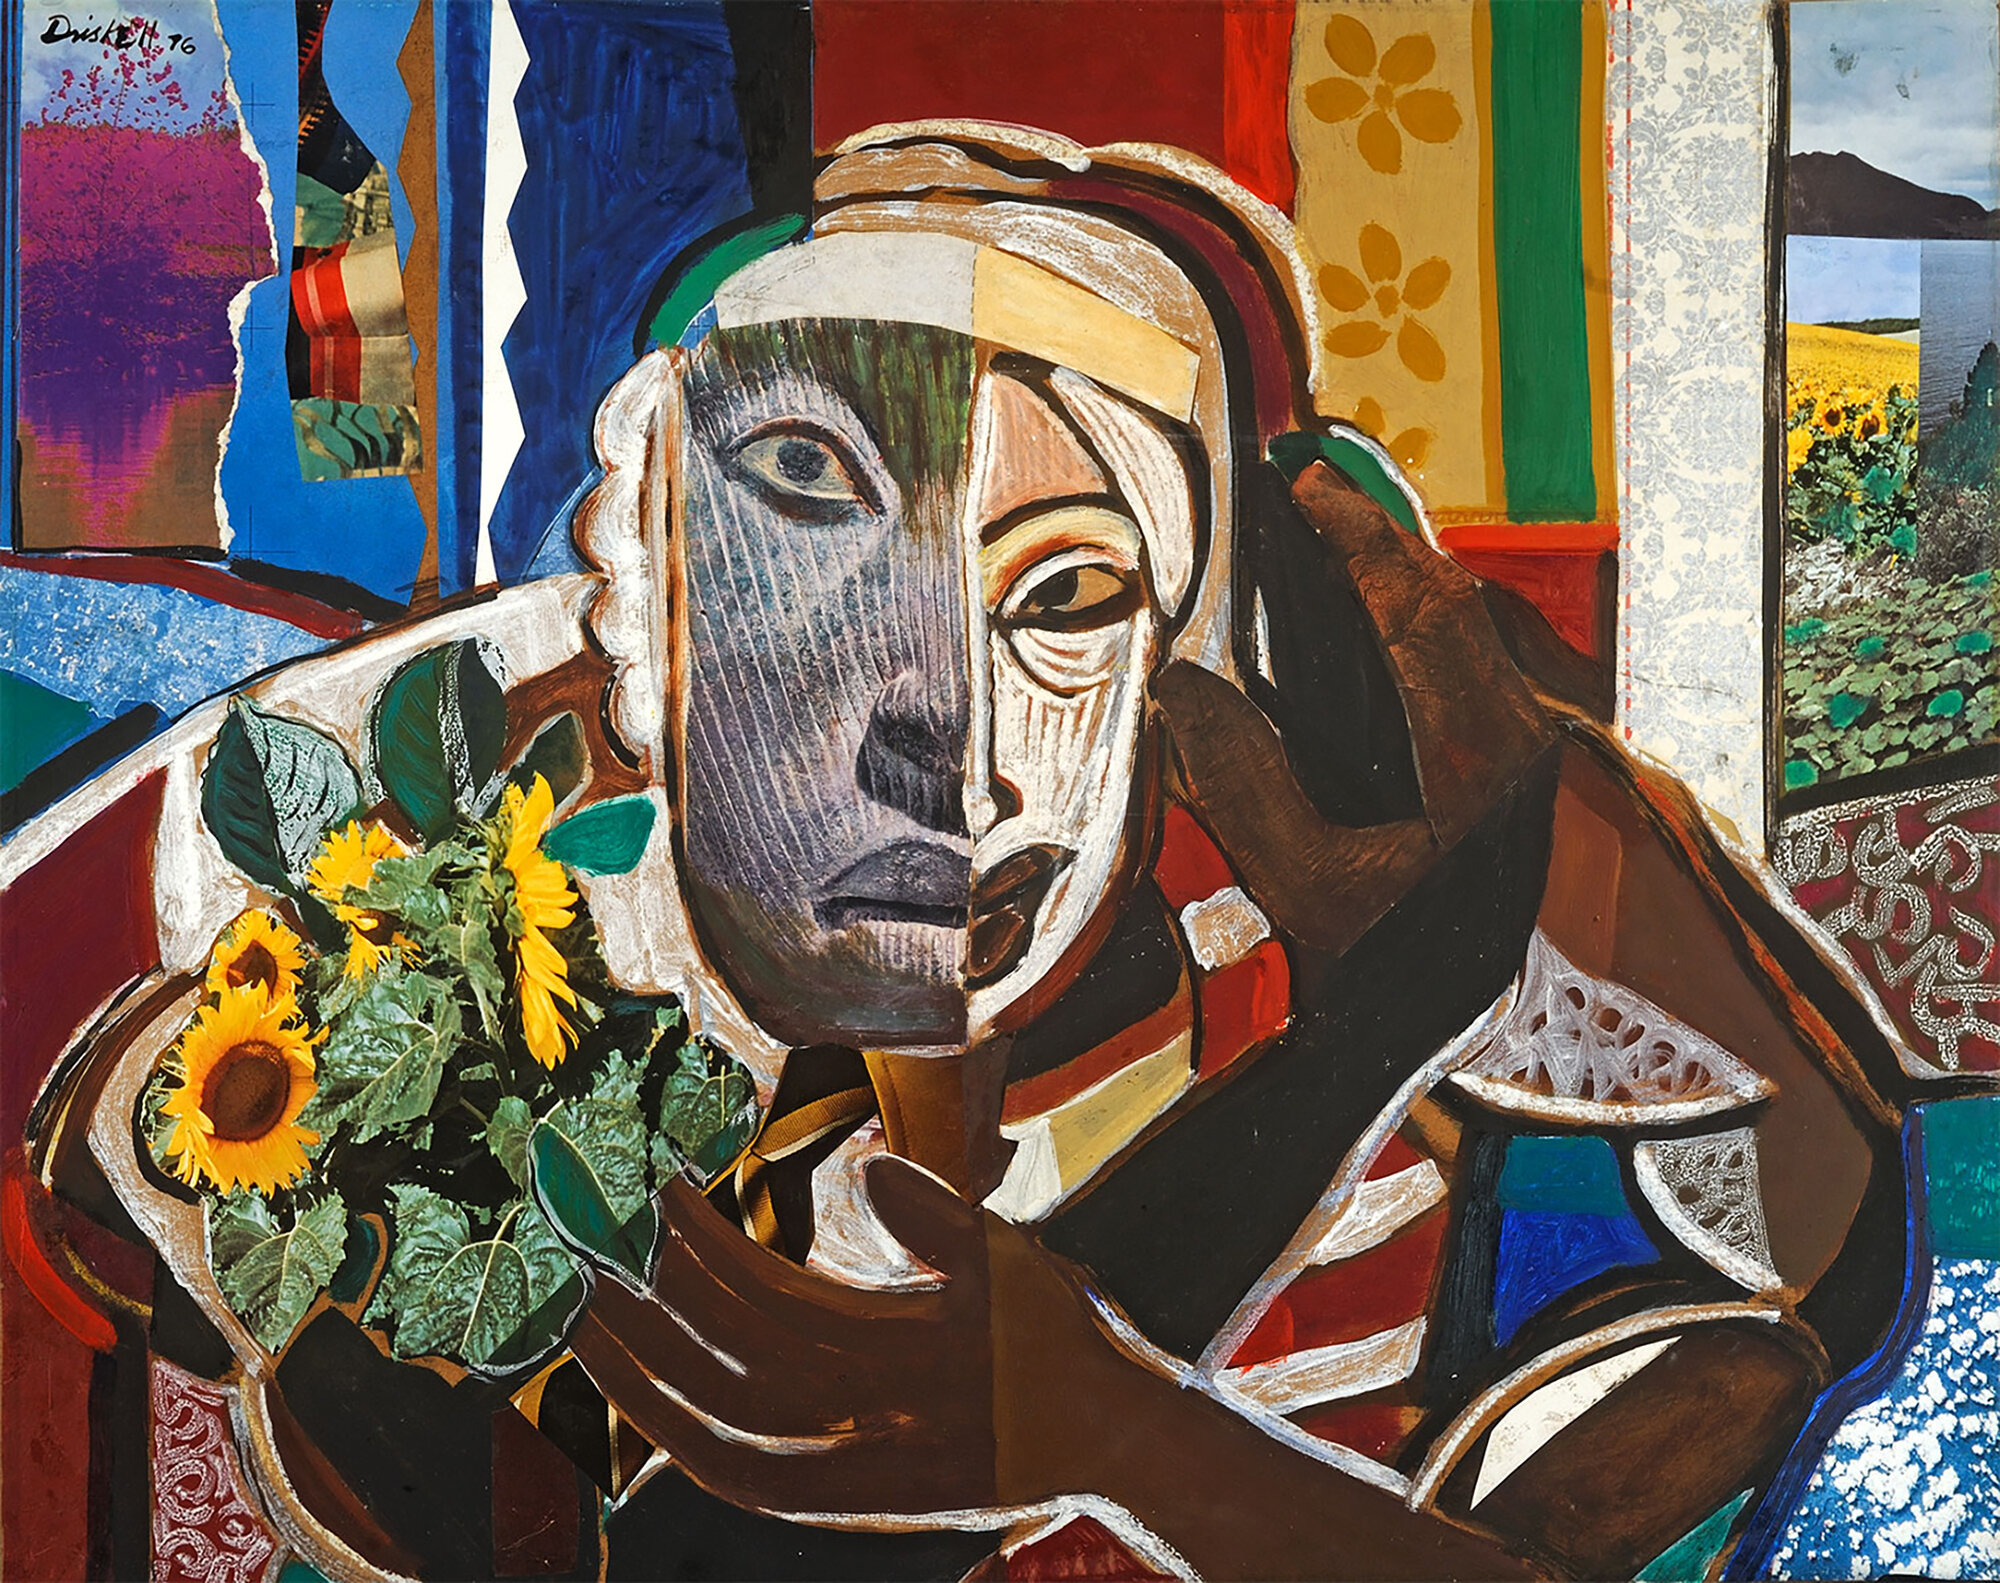  David C. Driskell (United States, 1931–2020),  Homage to Romare , 1976, collage and gouache on Masonite, 23 1/2 x 29 1/2 inches. Virginia Museum of Fine Arts, Richmond. Arthur and Margaret Glasgow Endowment, 2017.3. Photograph by Travis Fullerton. ©